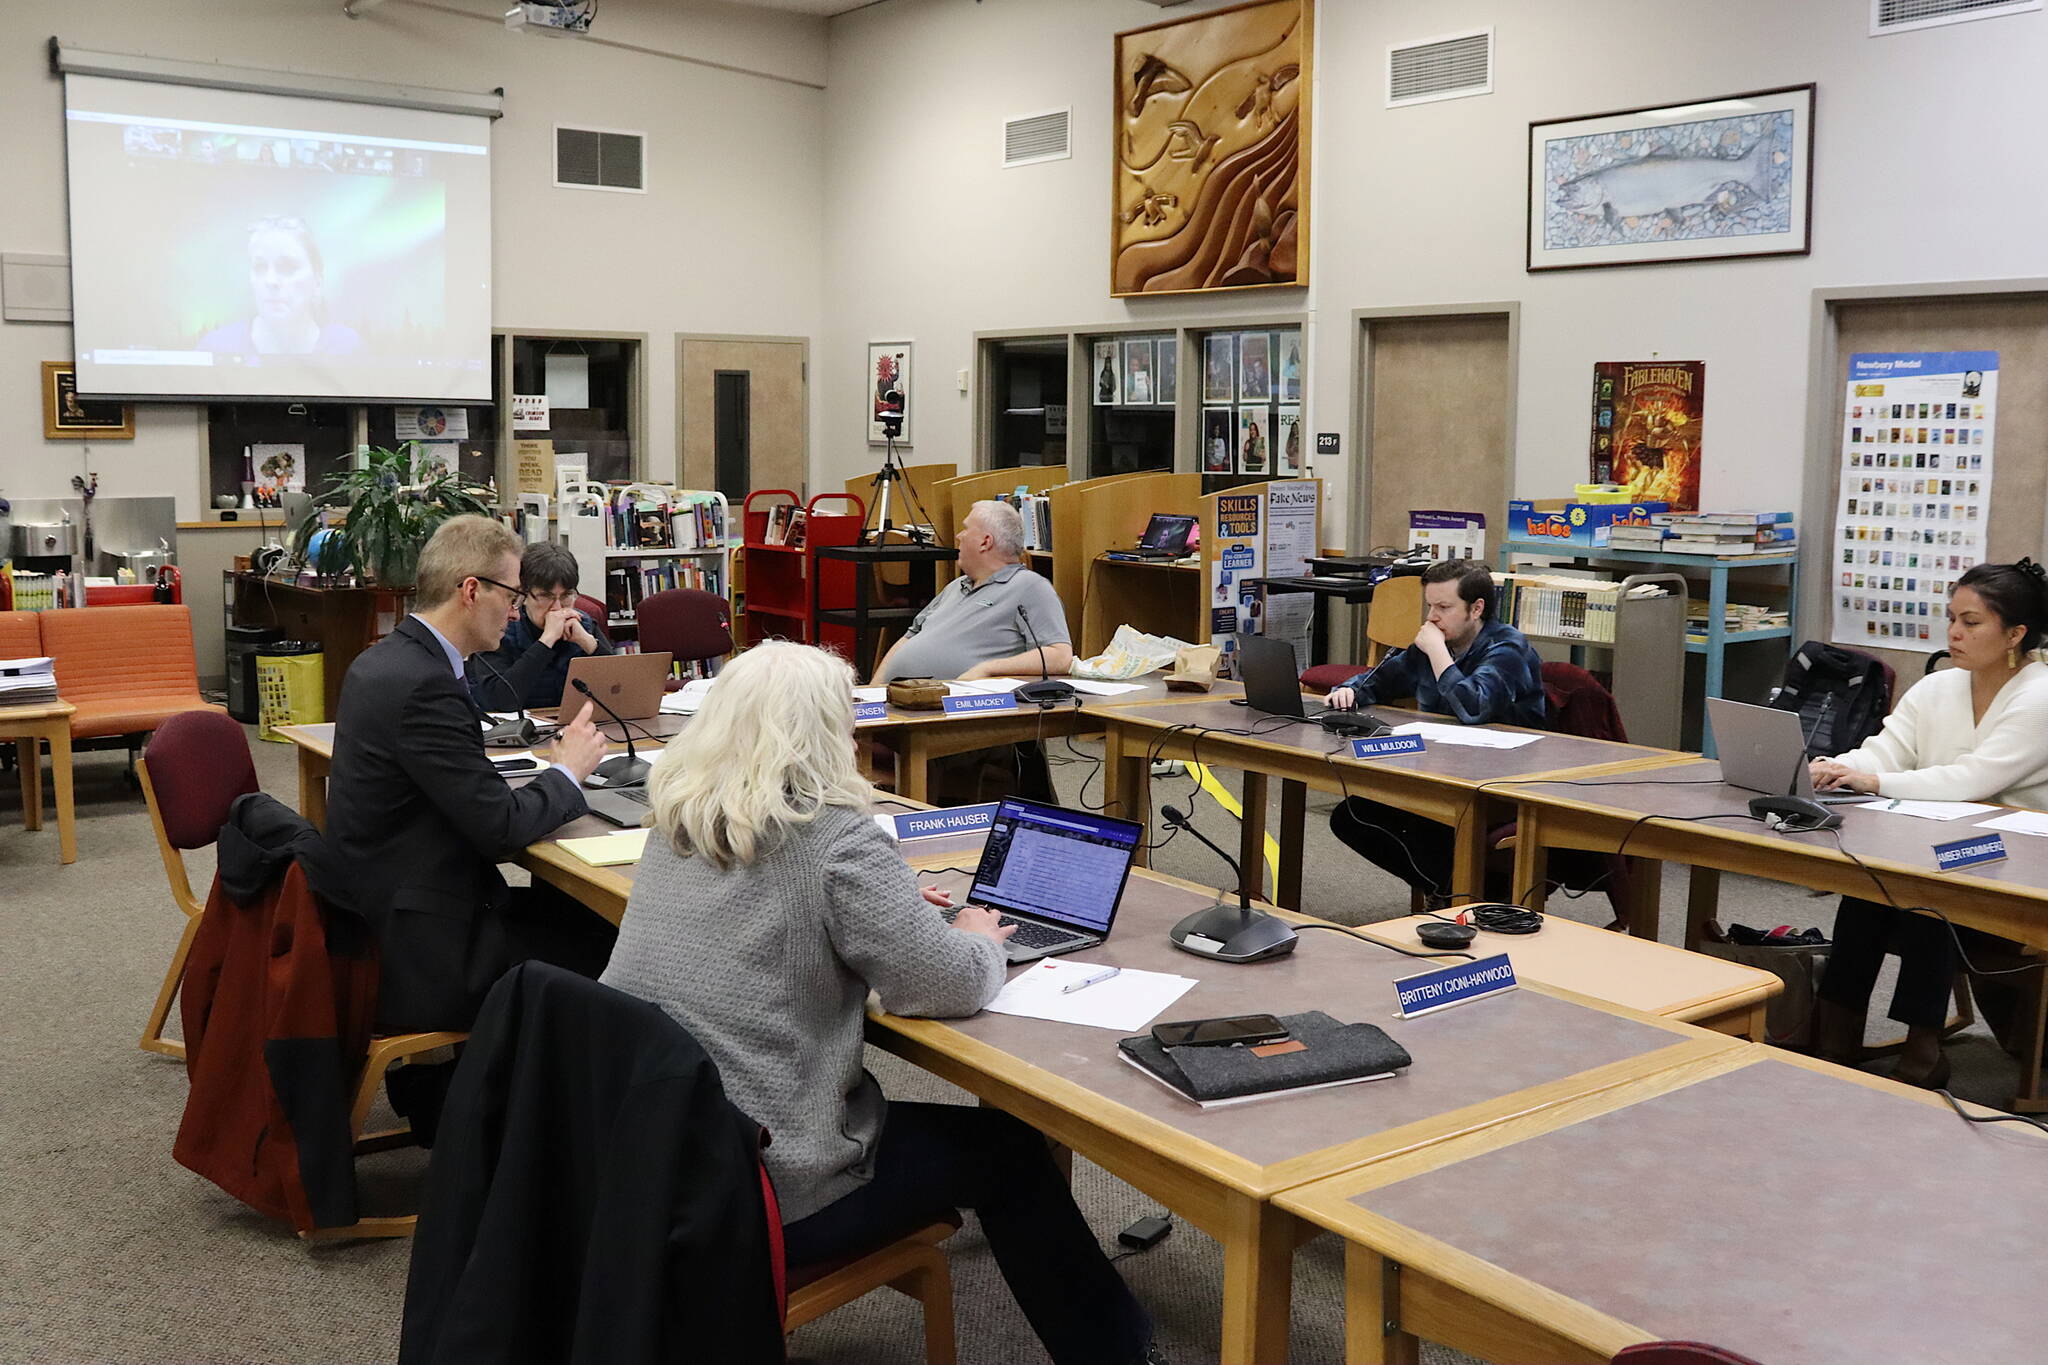 Juneau School District administrators and board members listen Tuesday to a remote presentation by Lisa Pearce, hired as a budget expert in December, about how her analysis during the past few weeks revealed a $9.5 million deficit facing the district this fiscal year. (Mark Sabbatini / Juneau Empire)